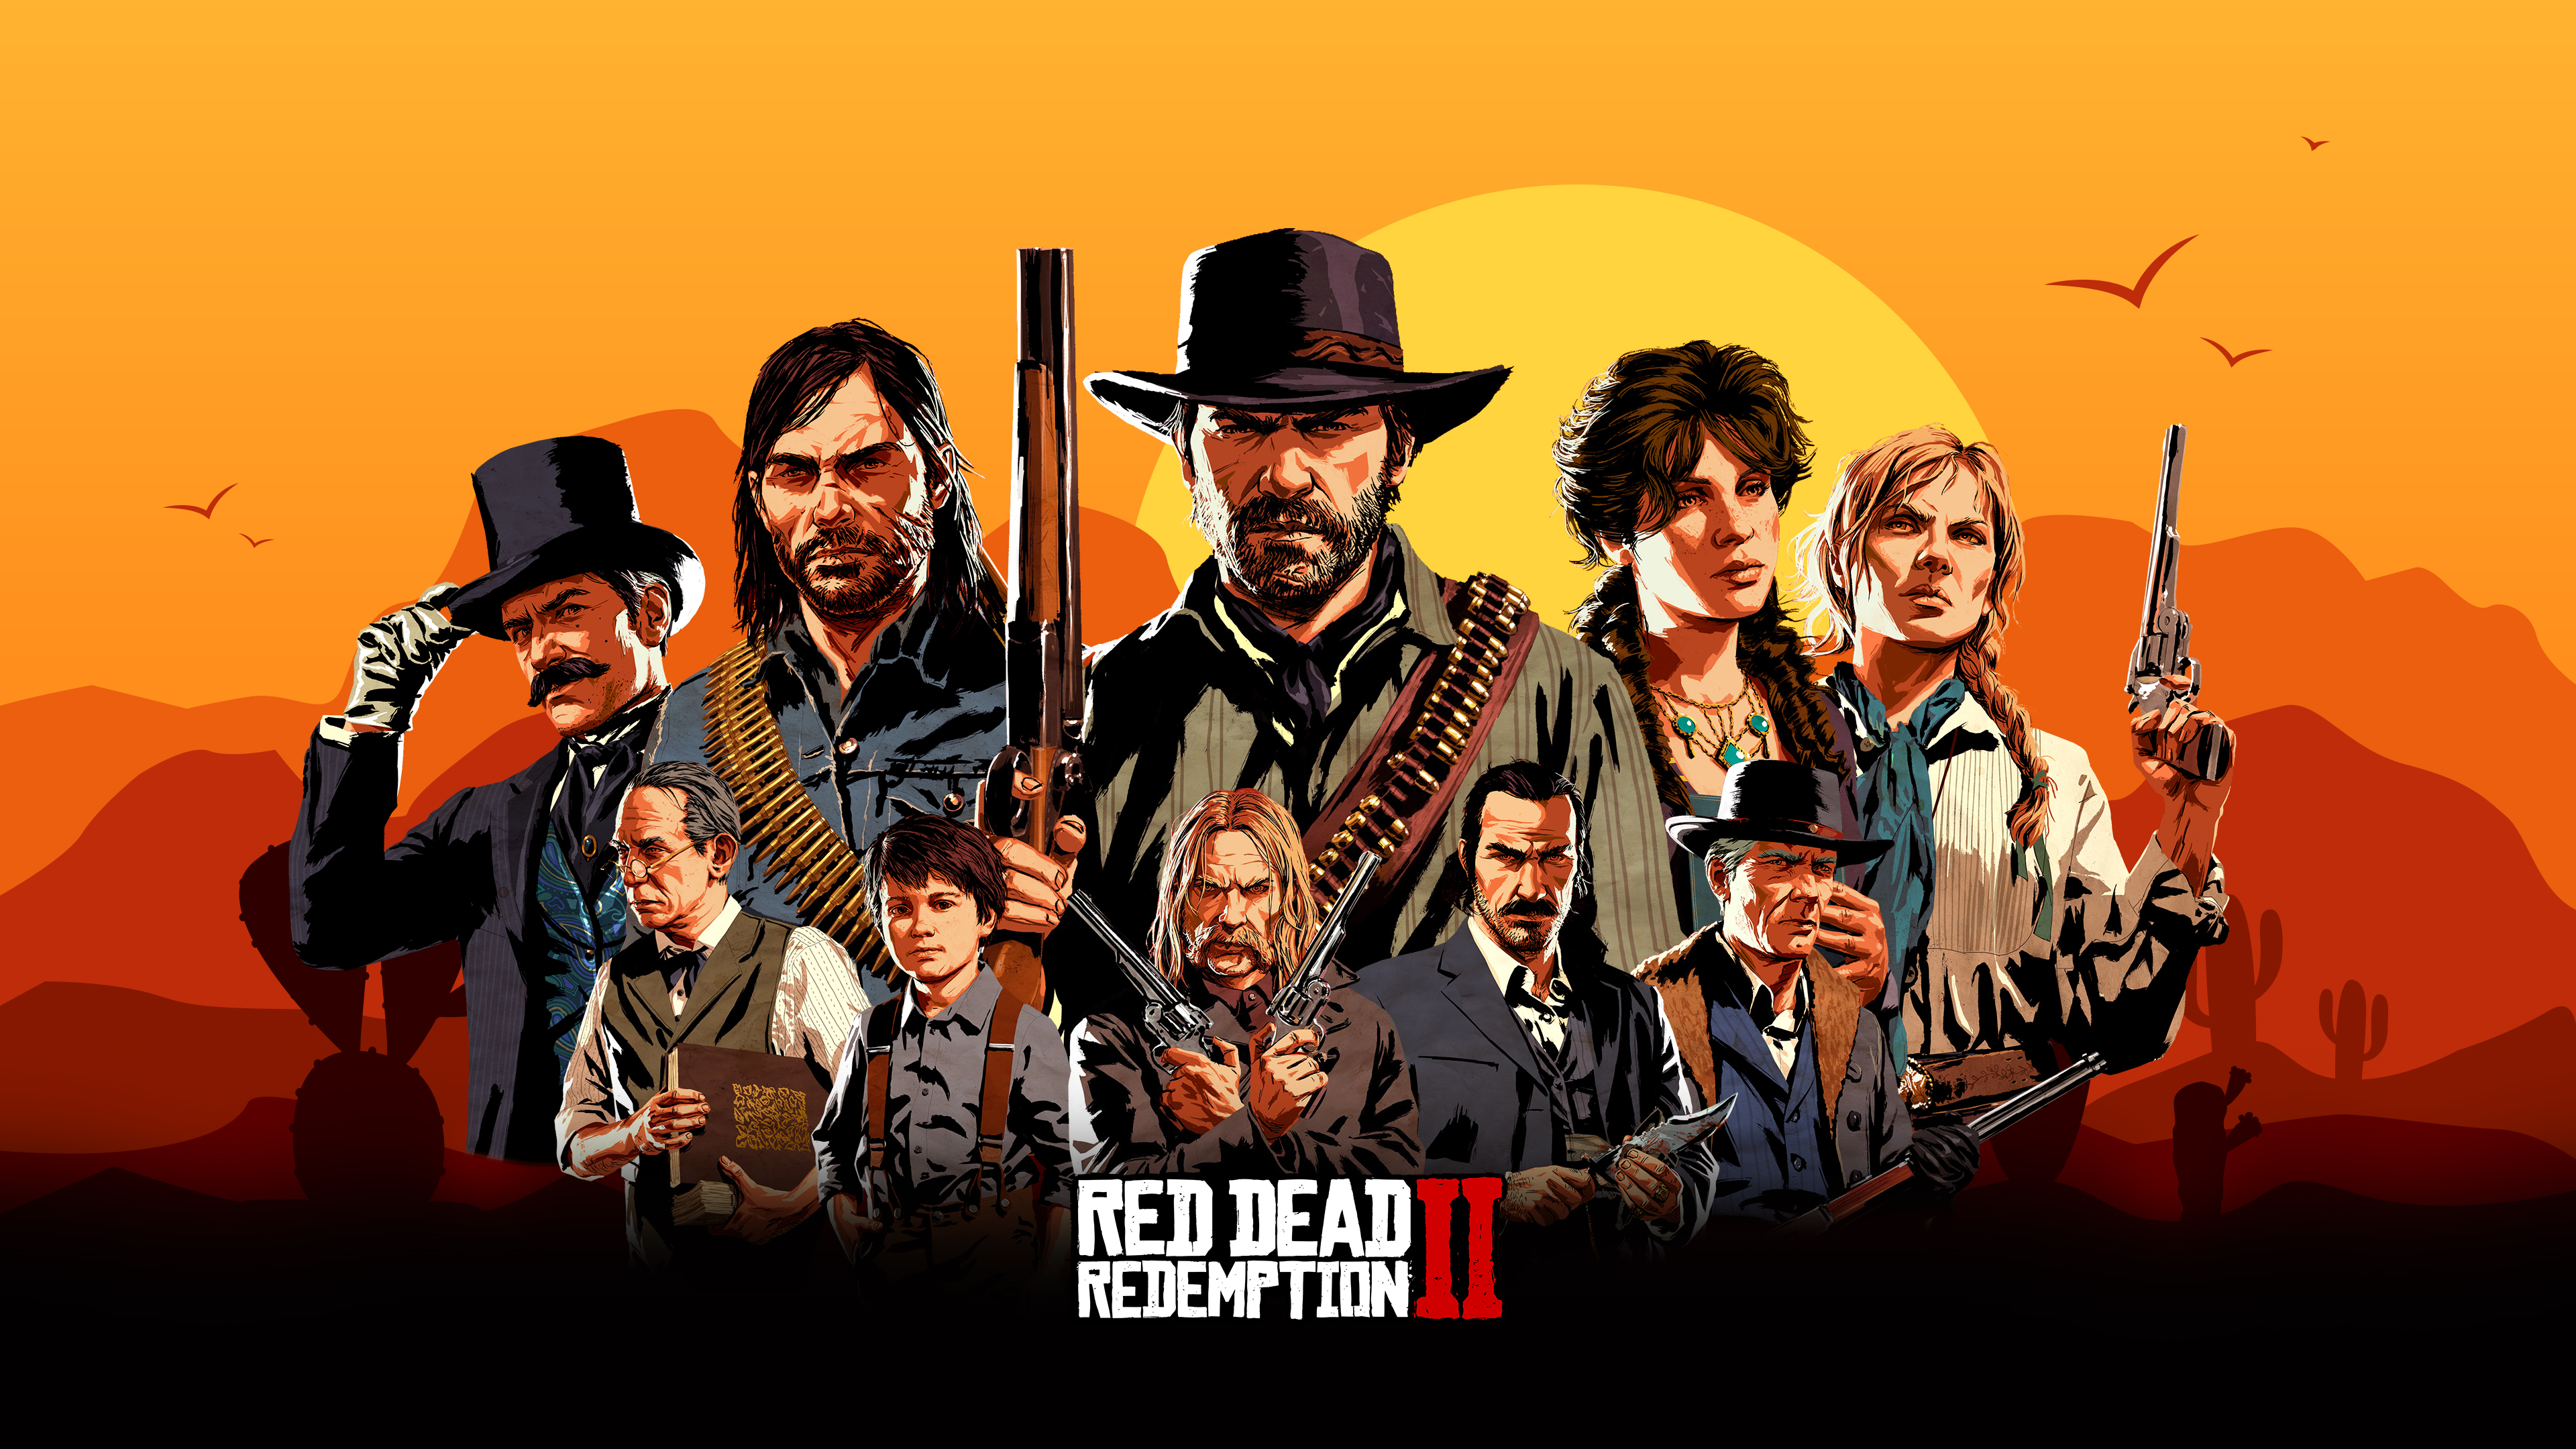 290+ Red Dead Redemption 2 HD Wallpapers and Backgrounds